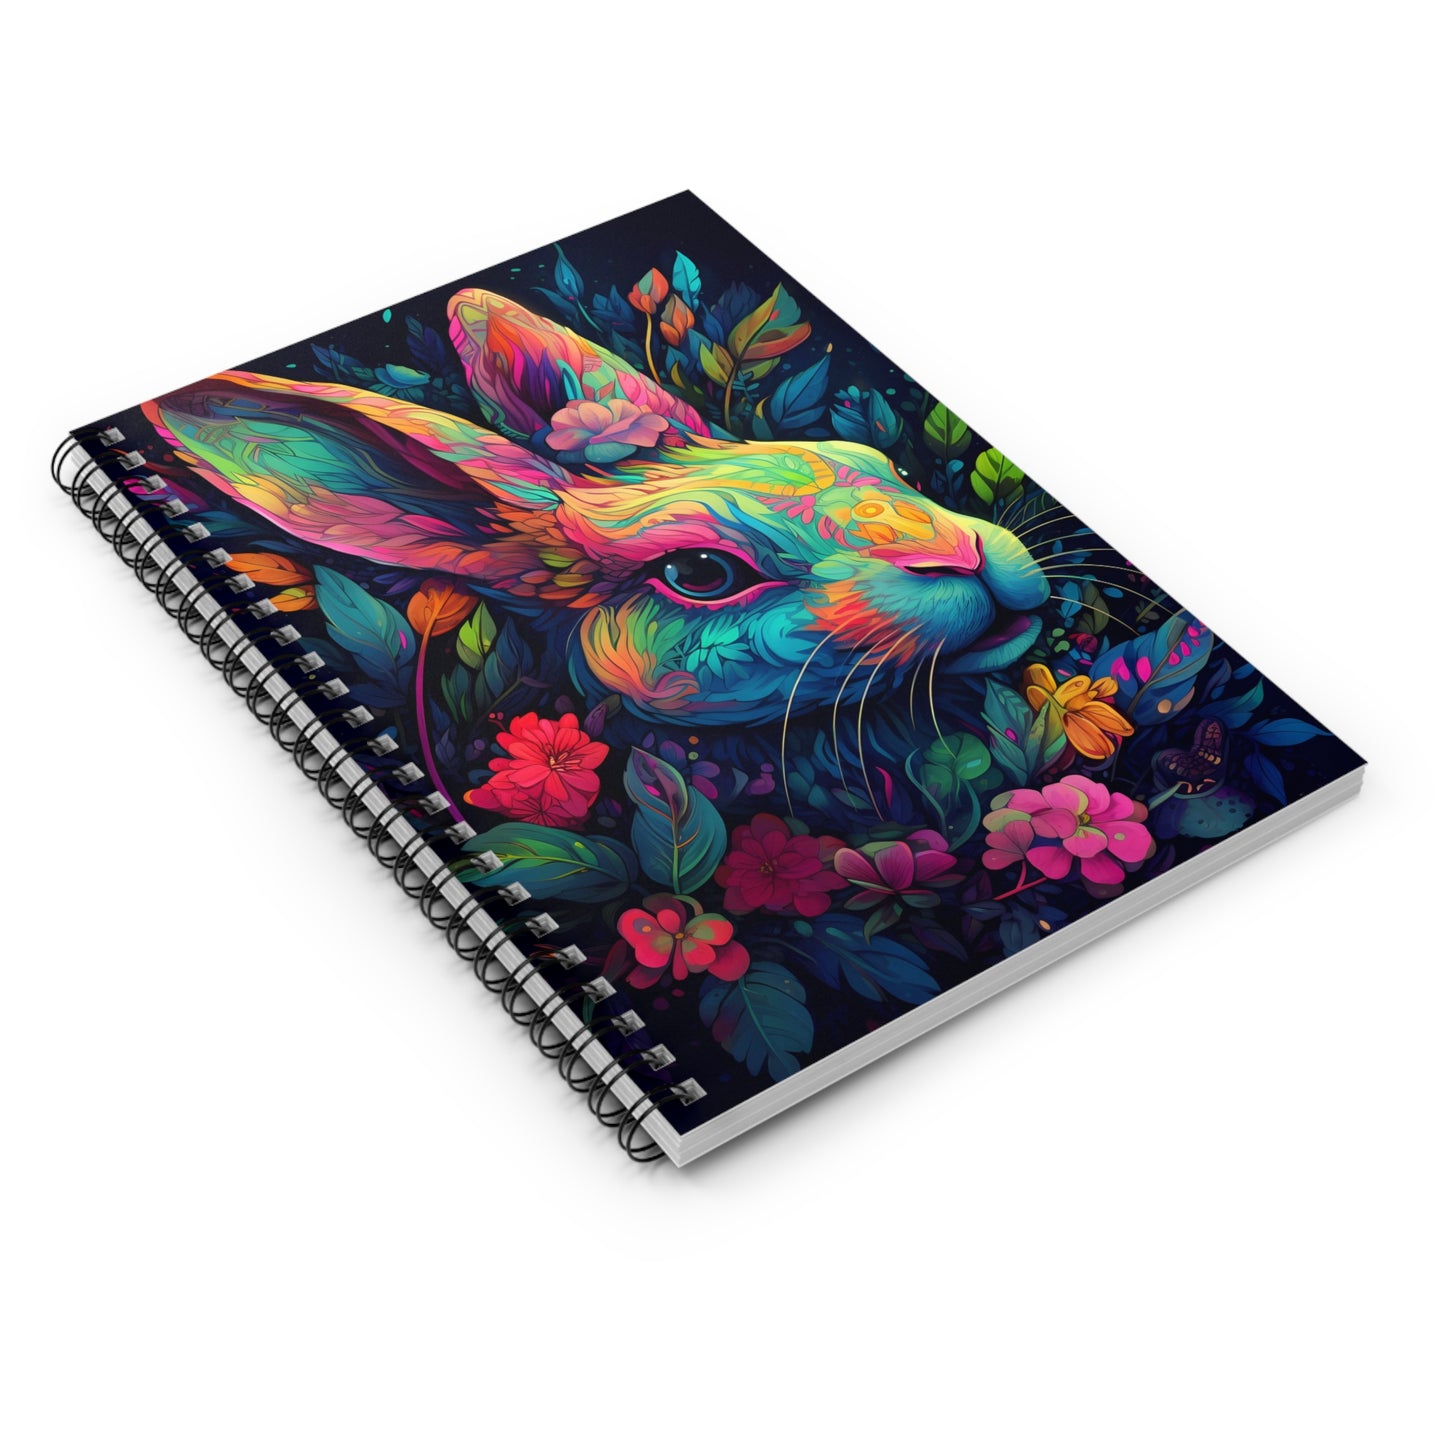 Colorful Neon Rabbit Notebook